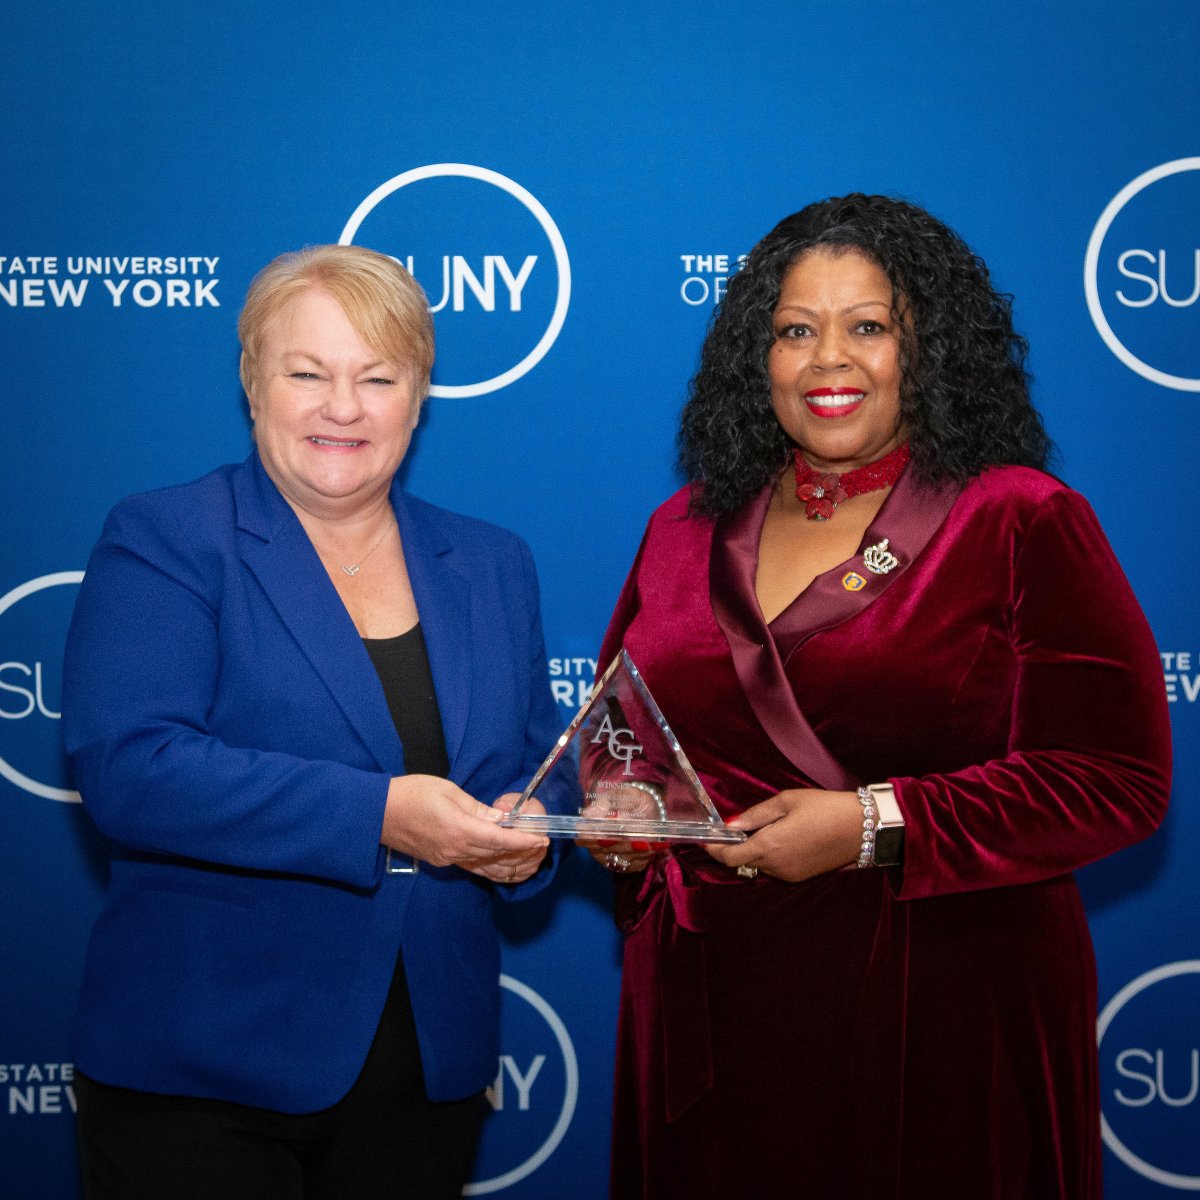 Jawana Carter-Richardson is a 3x grad and MBA student at @SUNYEmpire. Jawana is a fierce advocate for victims of DWI/DUI incidents and volunteers regularly with @MADDNational and @STOPDWINewYork.